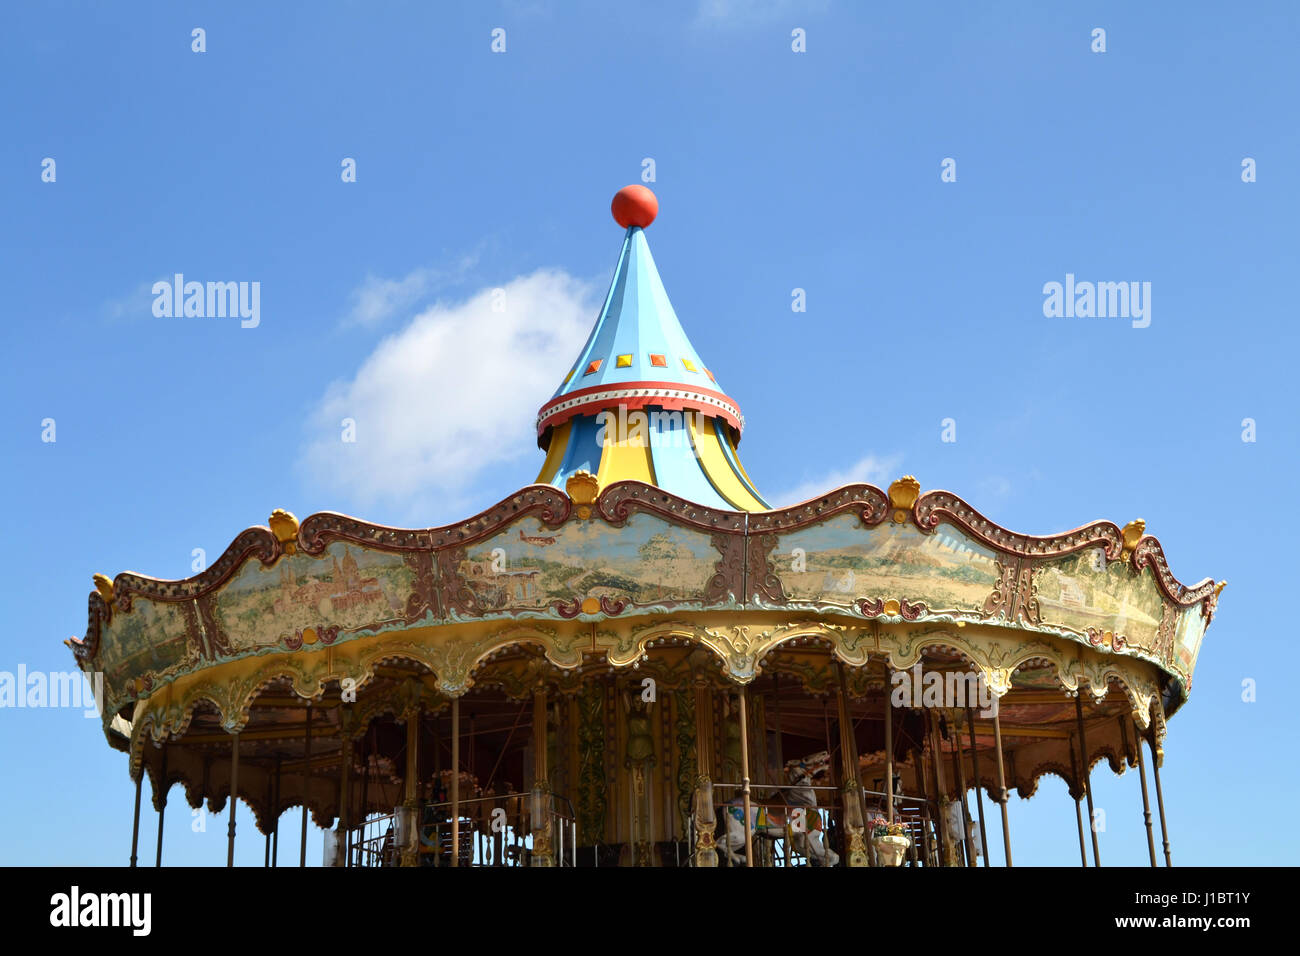 Old carousel attraction in Barcelona, Spain Stock Photo